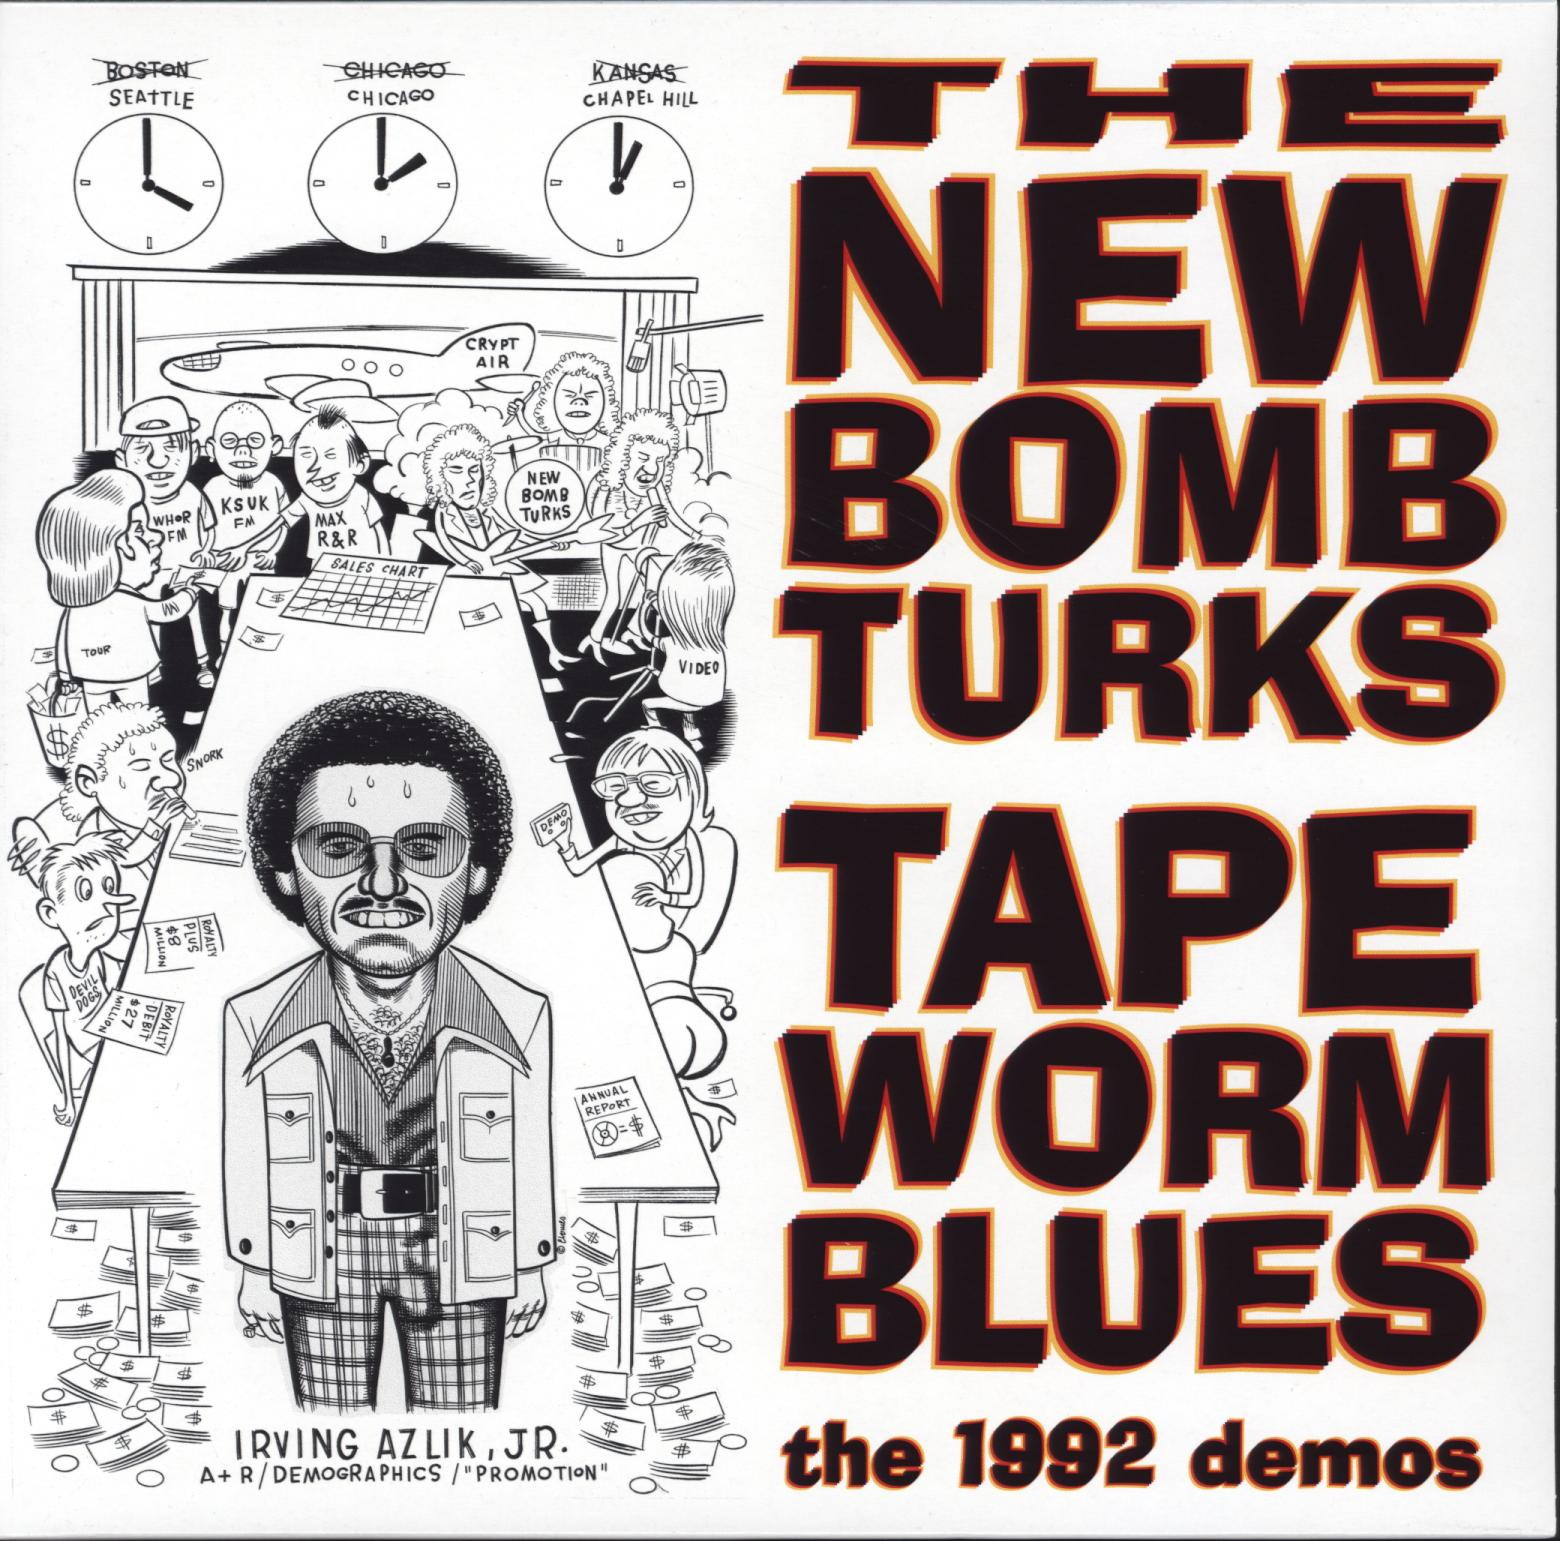 TAPEWORM BLUES (1992 DEMOS) (10IN)